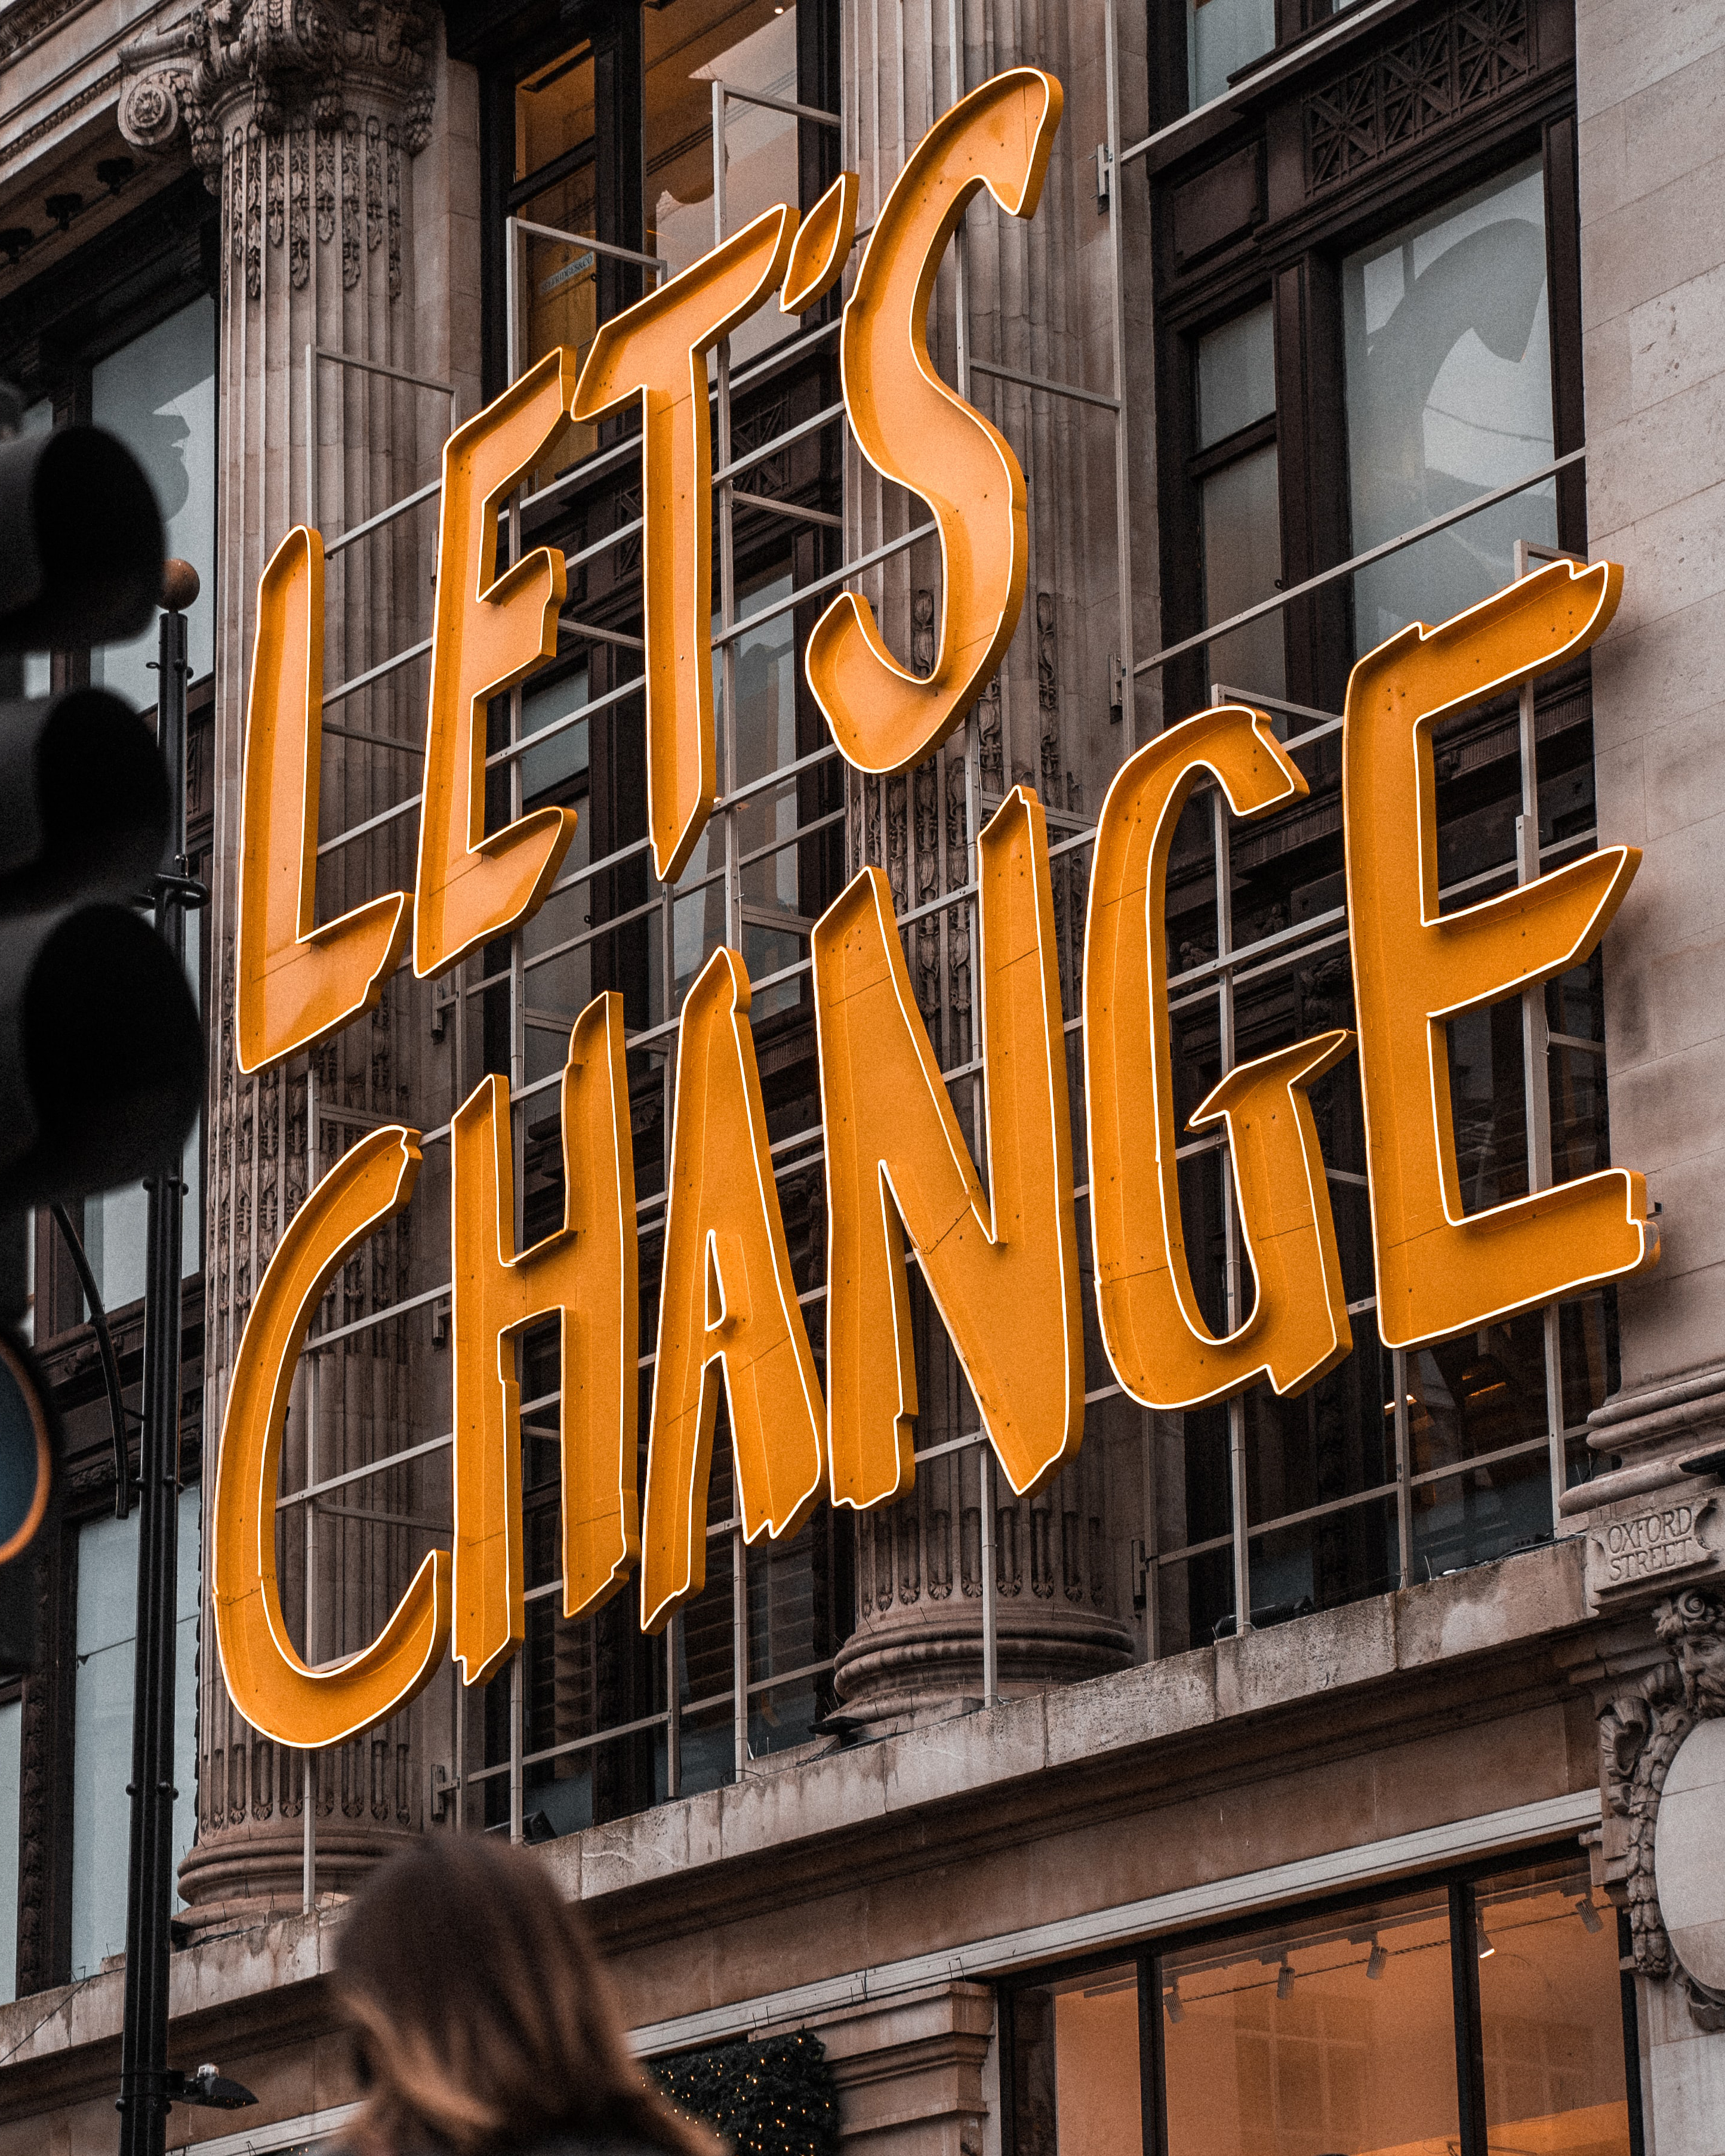 A sign on the side of a building that says "Let's Change" to represent changing your registered agent.